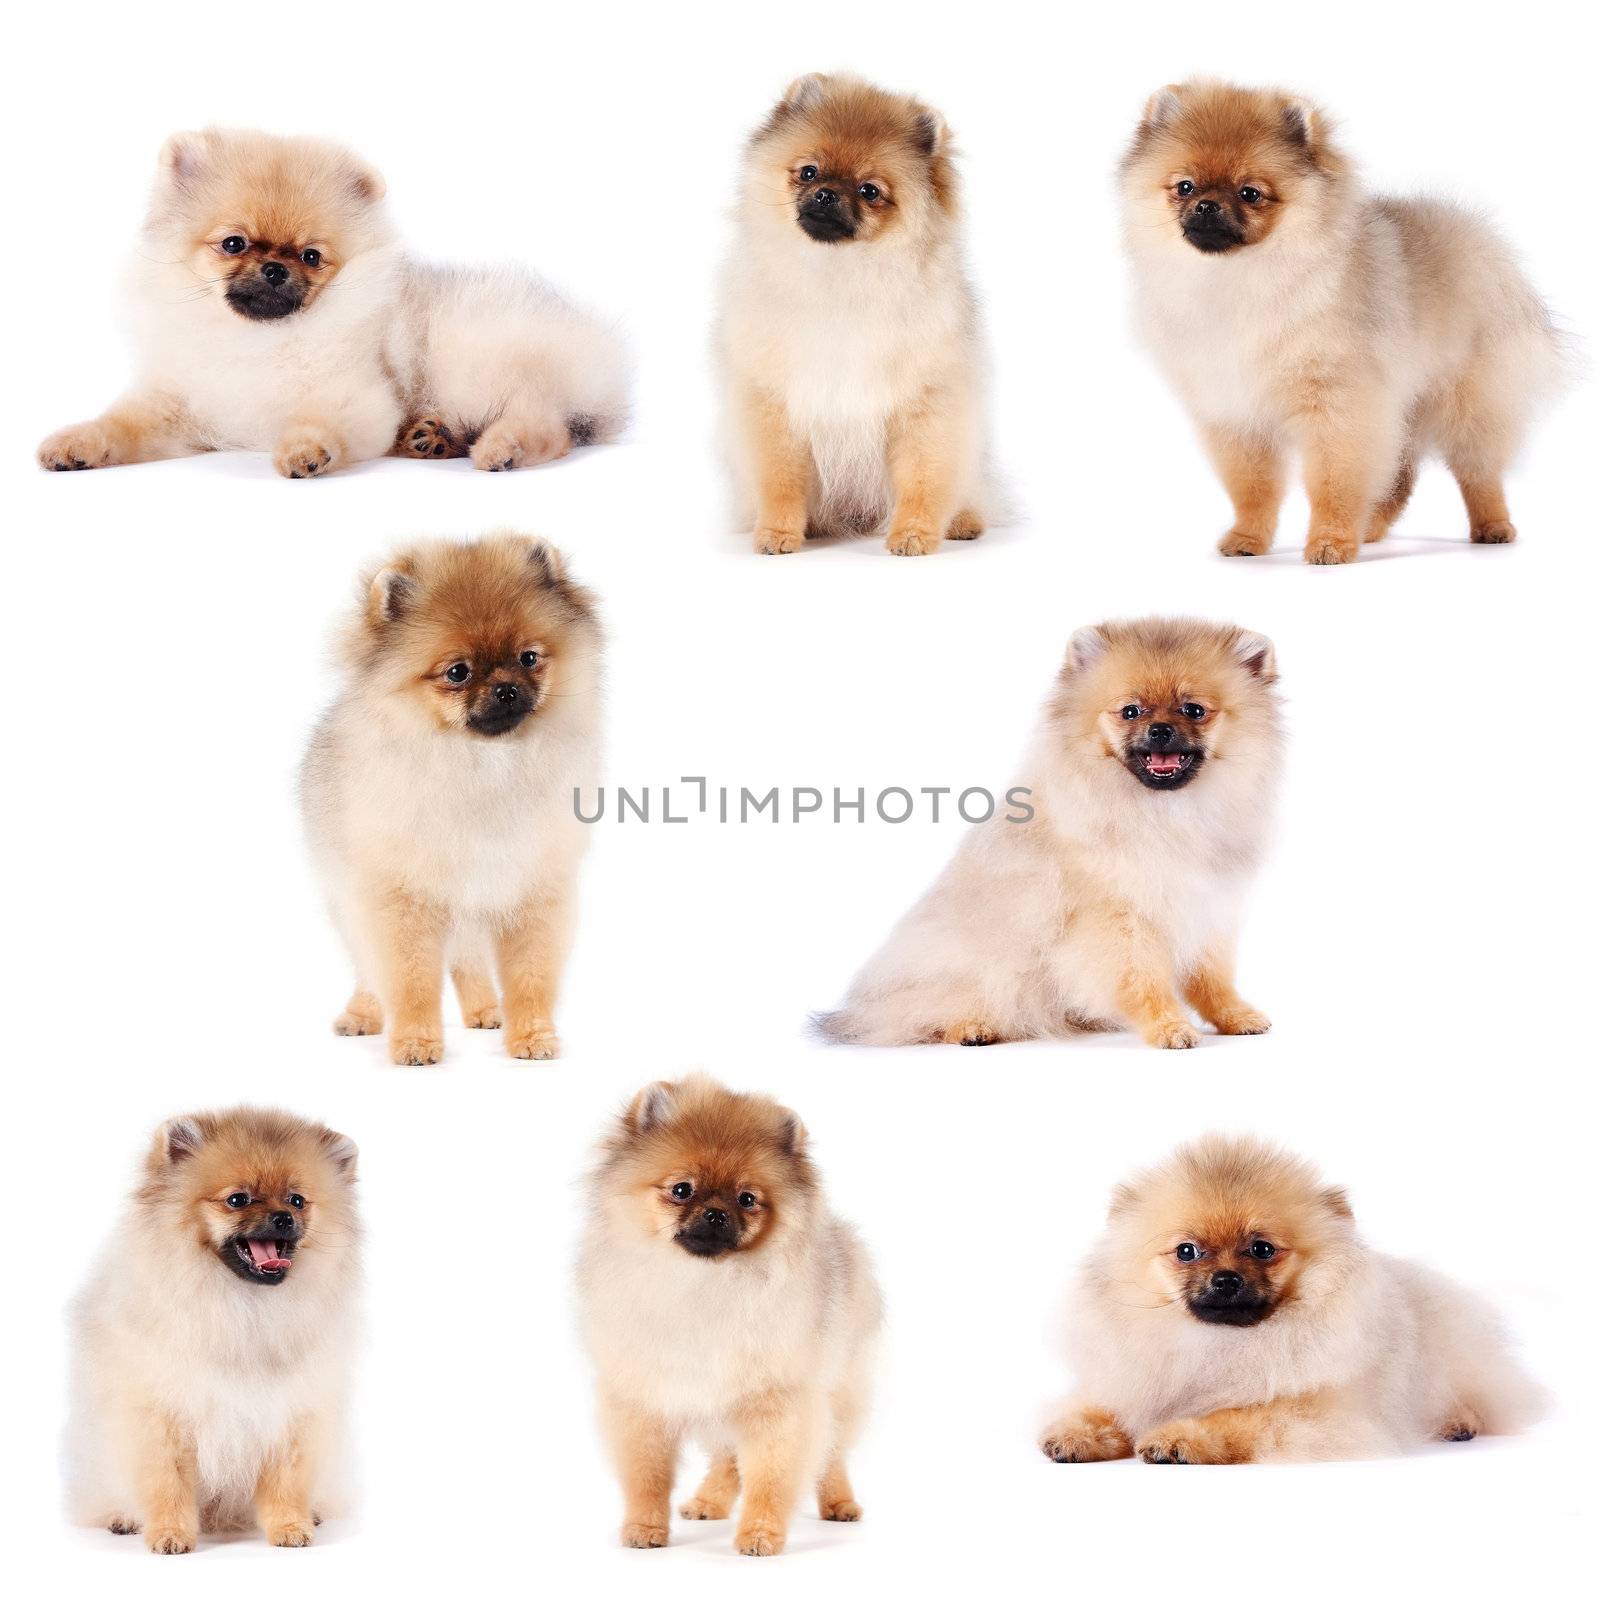 The puppies of a spitz-dog. Small doggies. Decorative thoroughbred dogs.